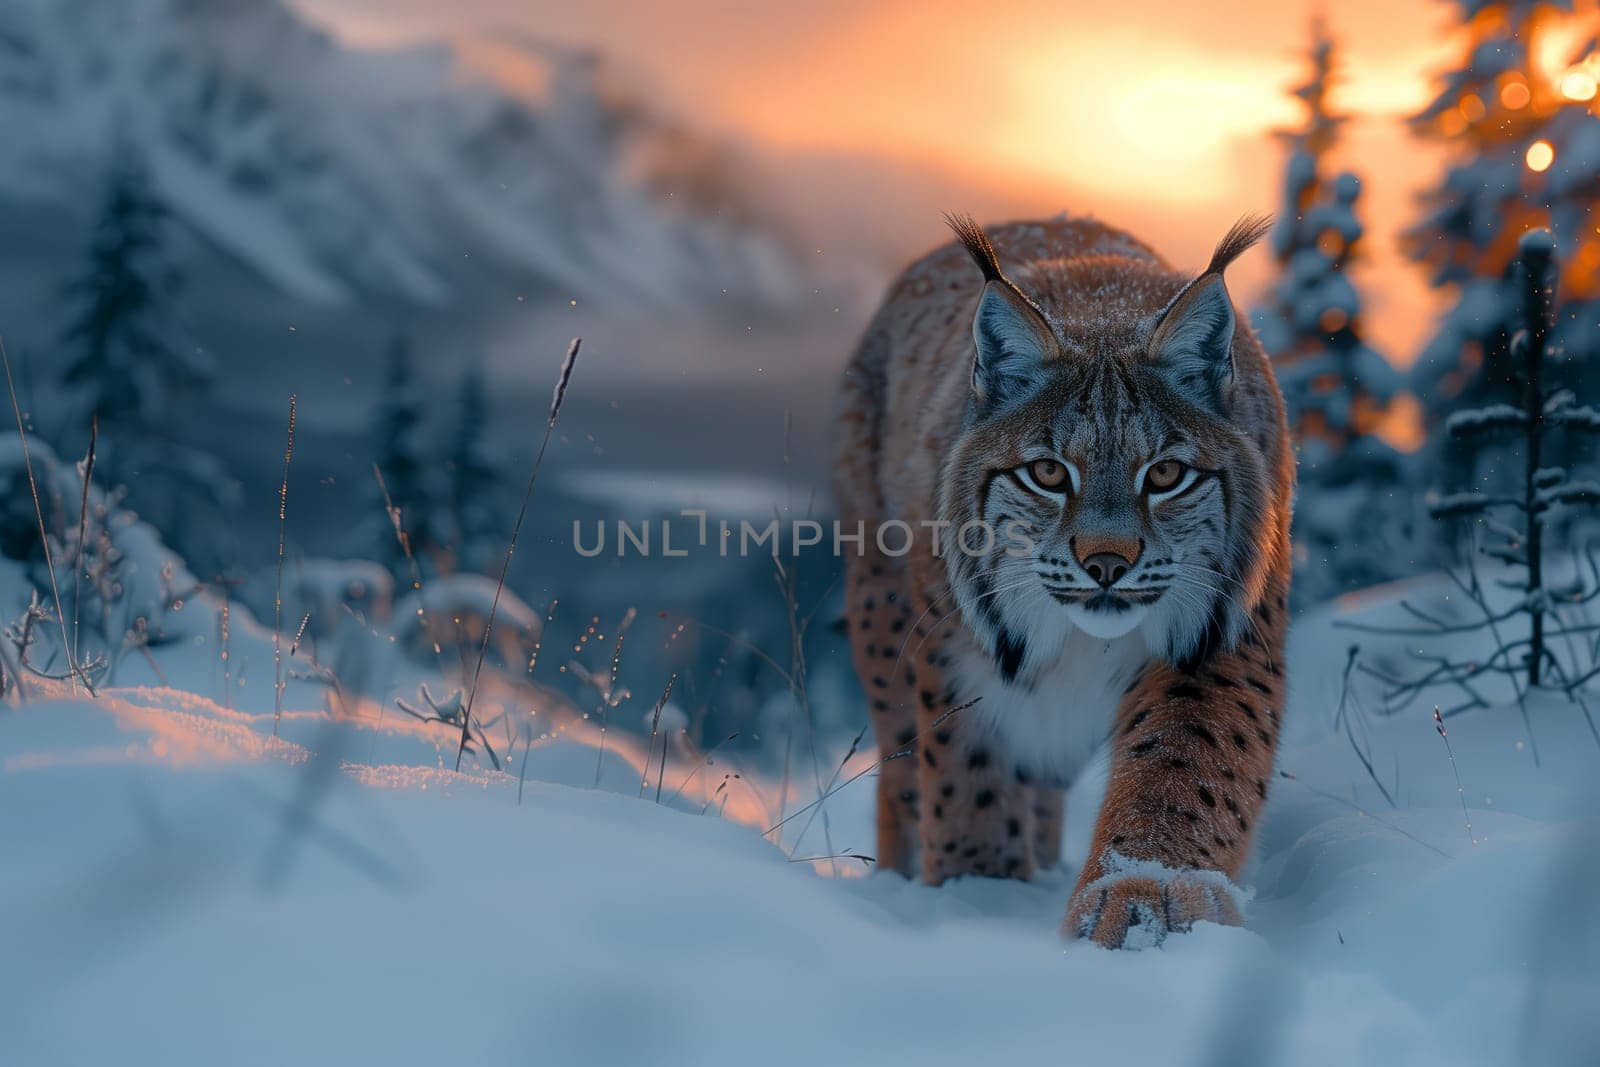 A Lynx, a felidae carnivore, walks on snow at sunset in a natural landscape by richwolf